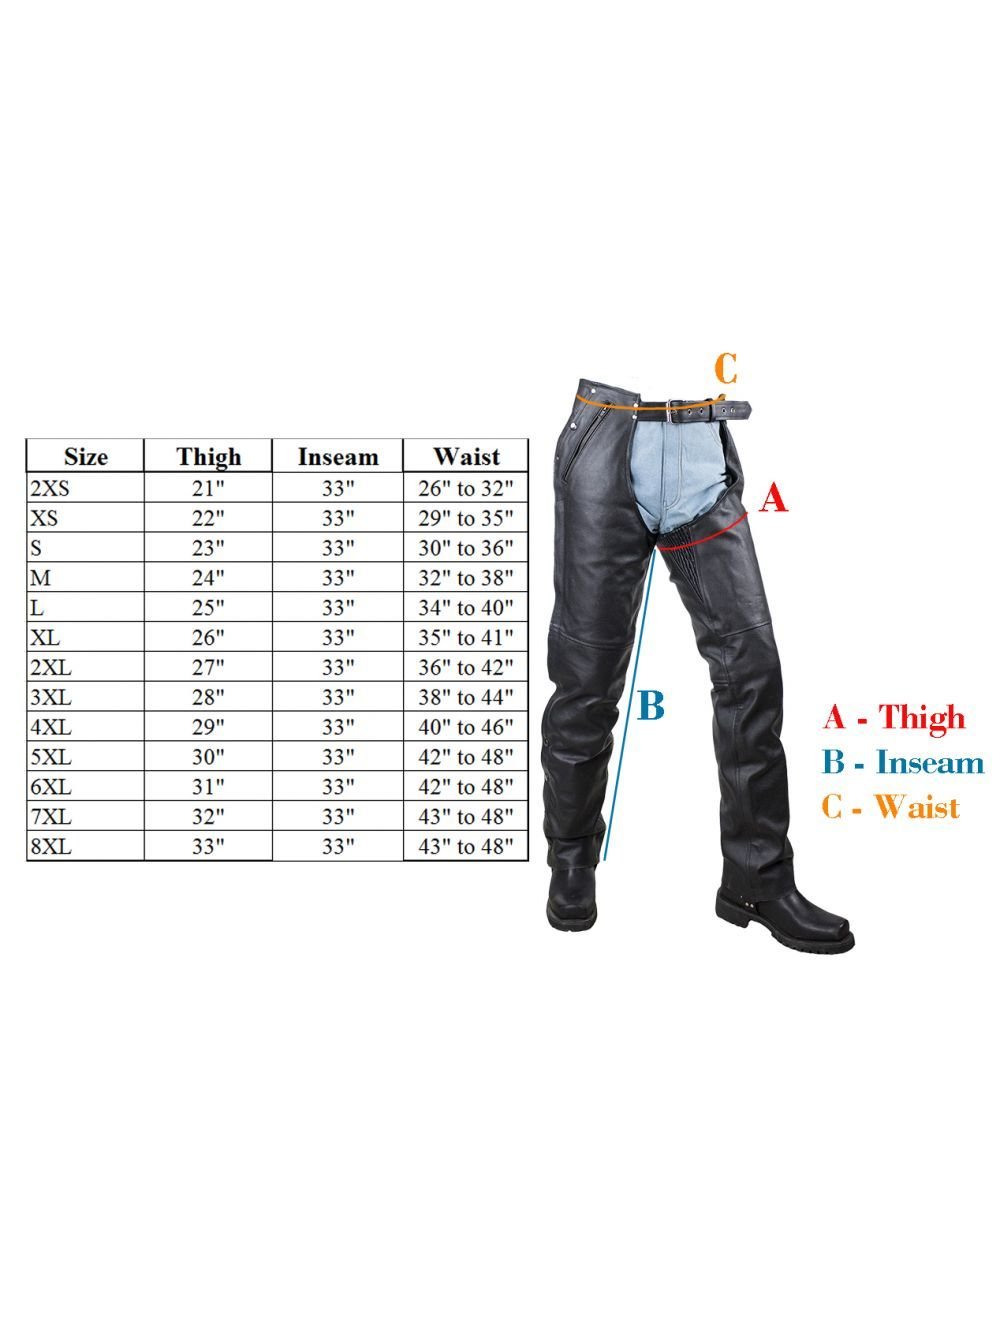 Size chart for unisex leather motorcycle chaps.